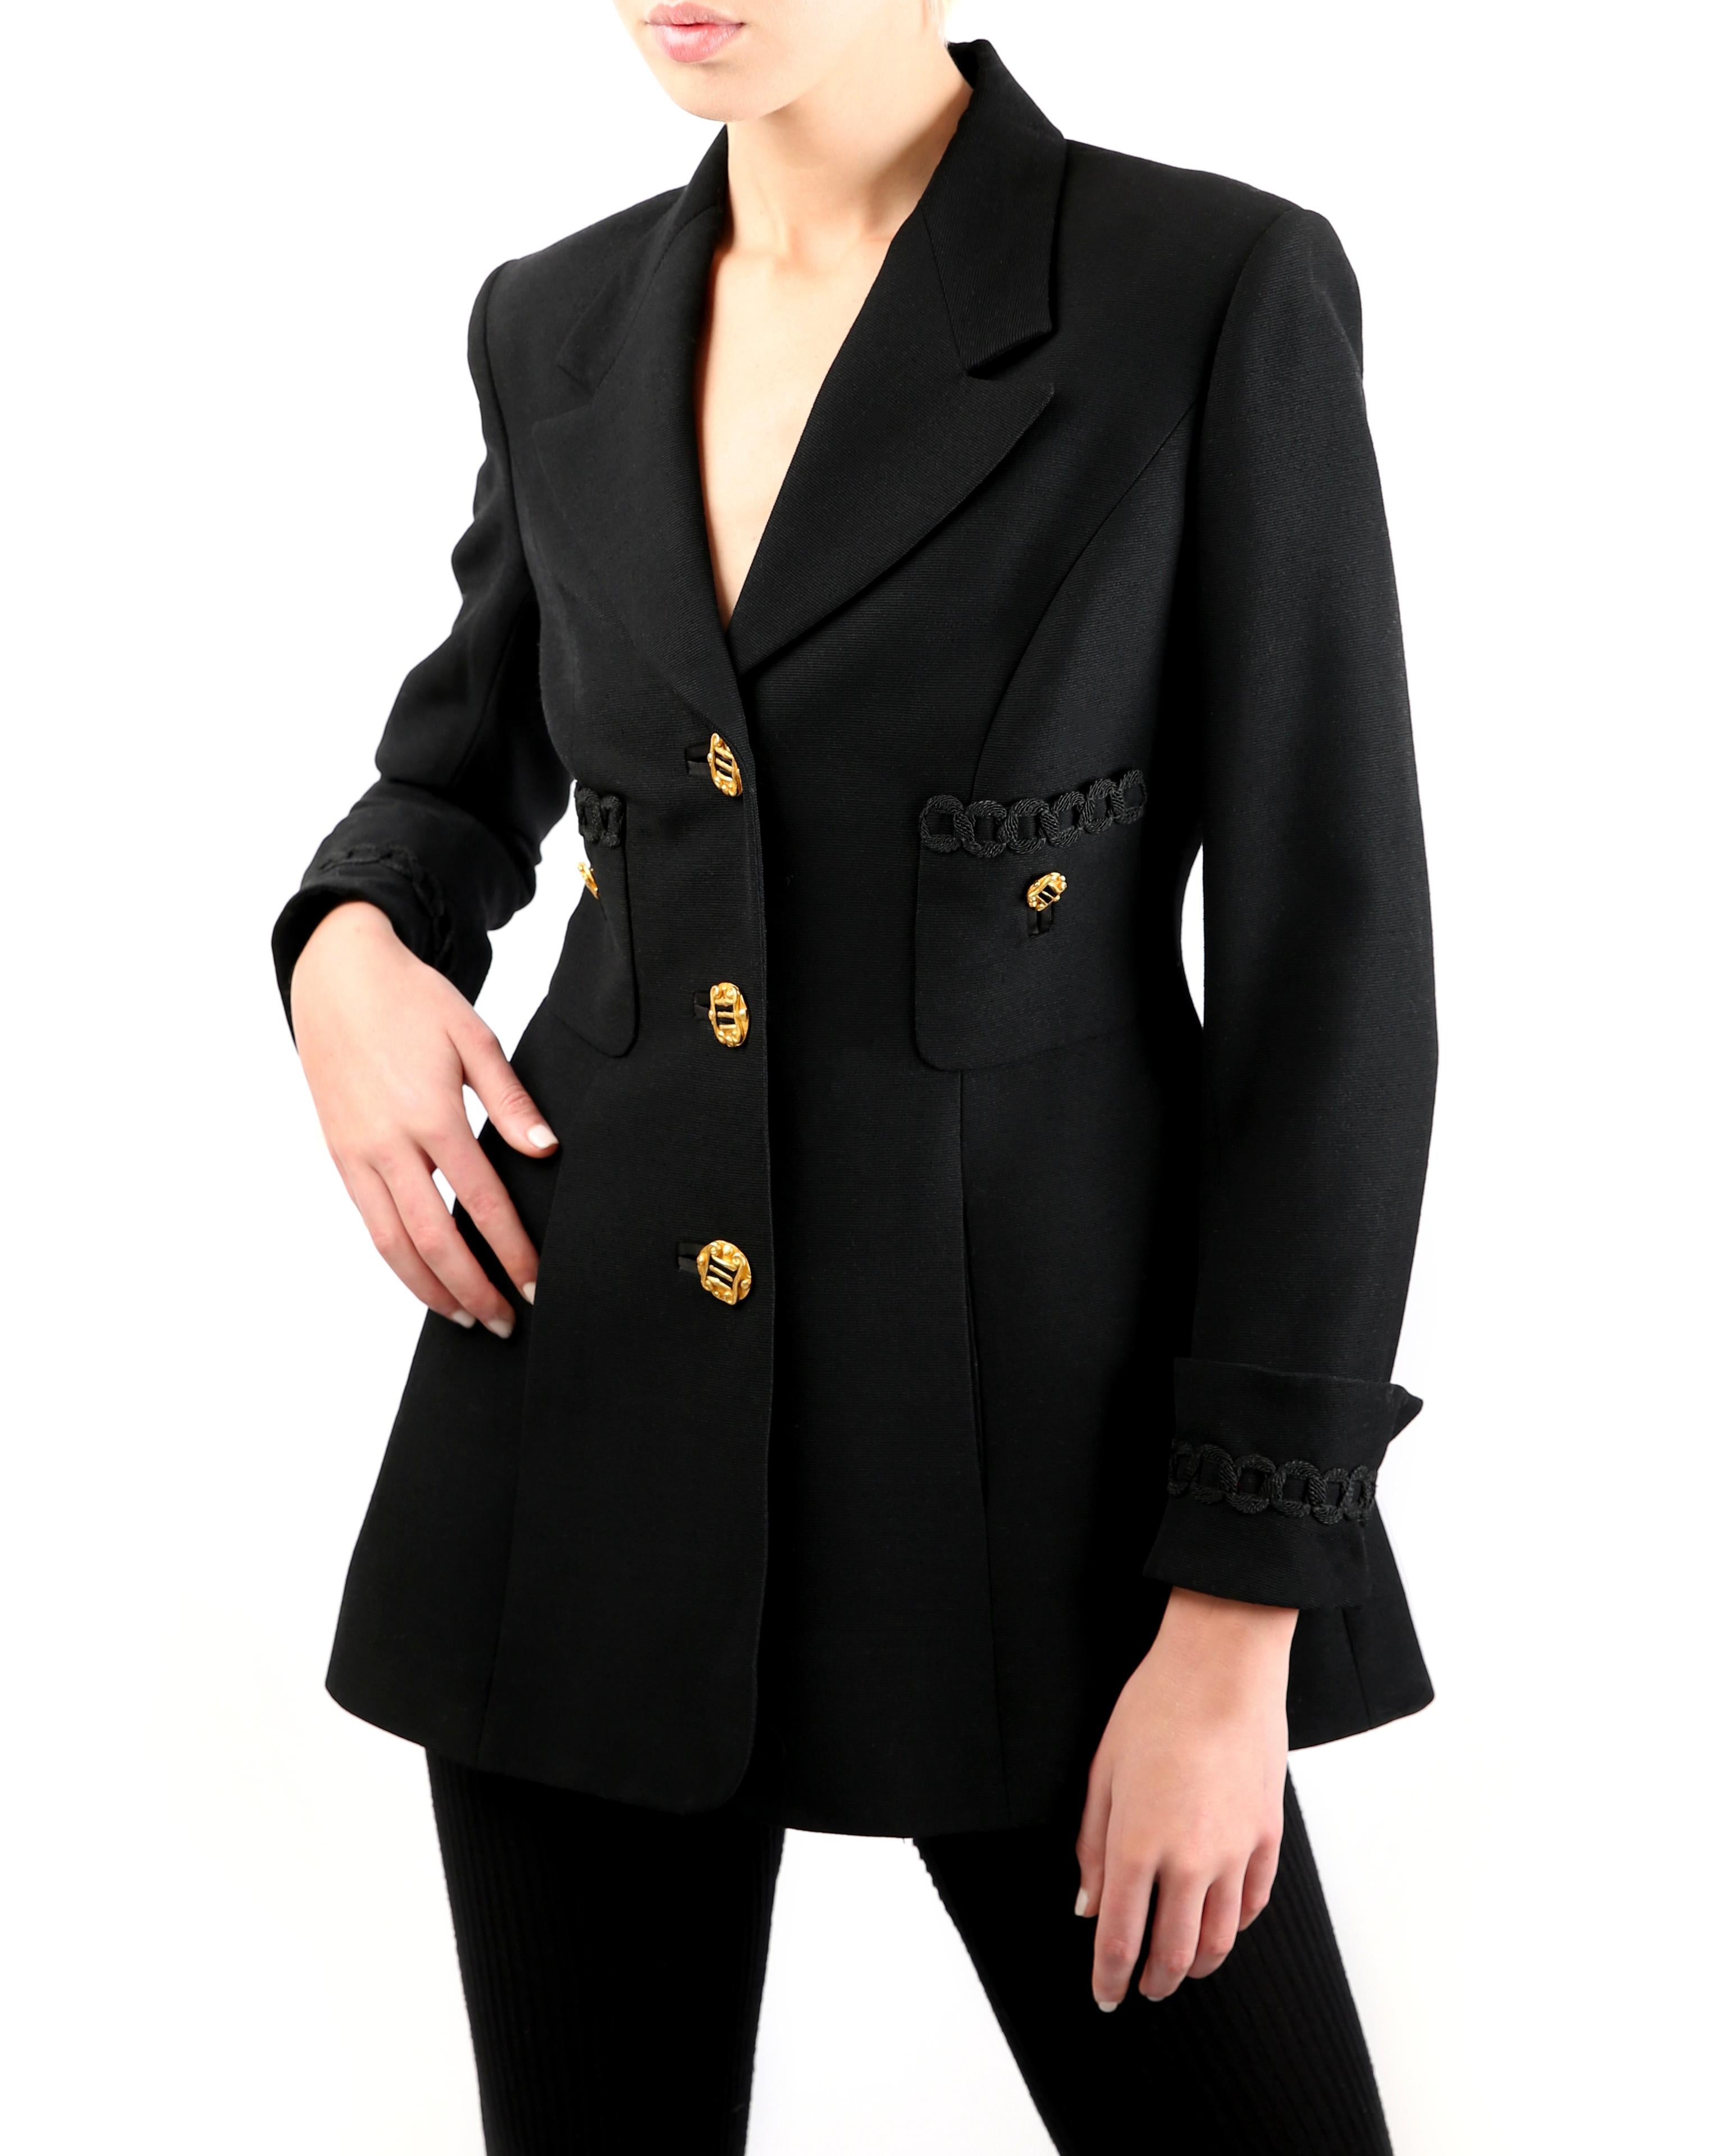 Louis Feraud vintage black blazer in wool
Three oversized gold buttons running down the centre front in order to close the jacket 
Two decorative buttons to two upper pockets on the right and left bust
One gold button to each sleeve cuff
Two